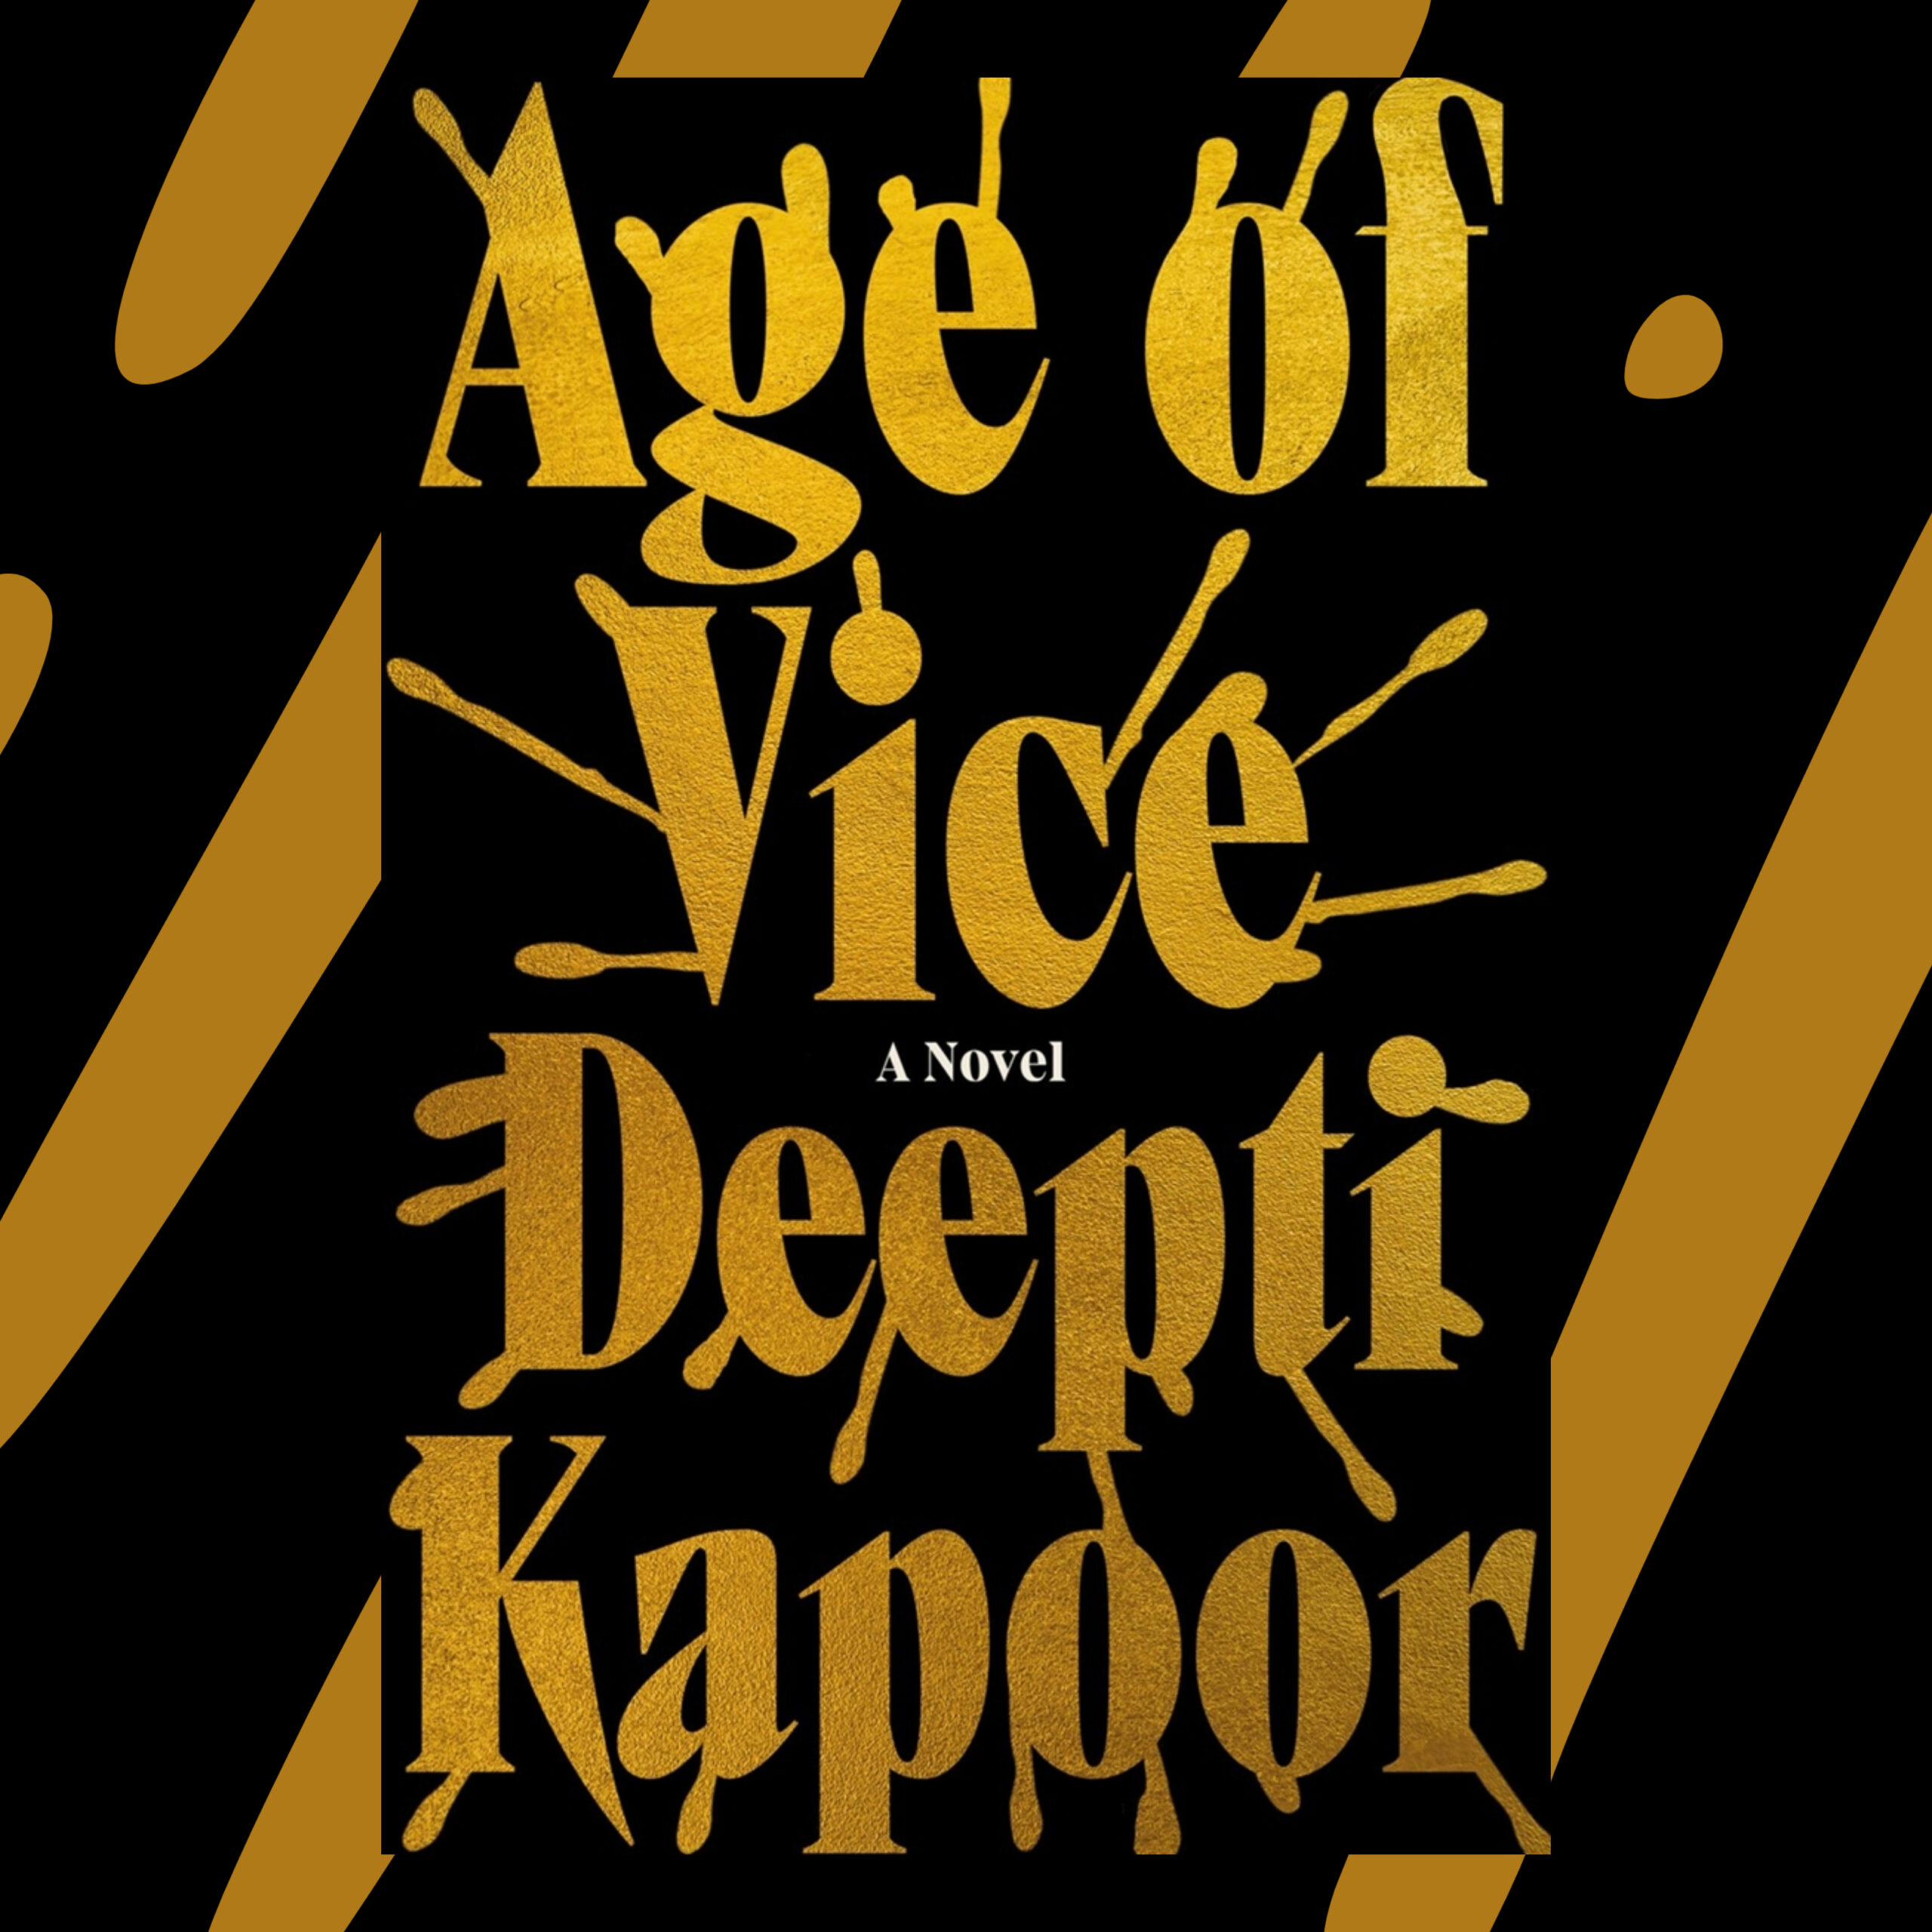 1808 - Deepti Kapoor - Age of Vice | The Book Show